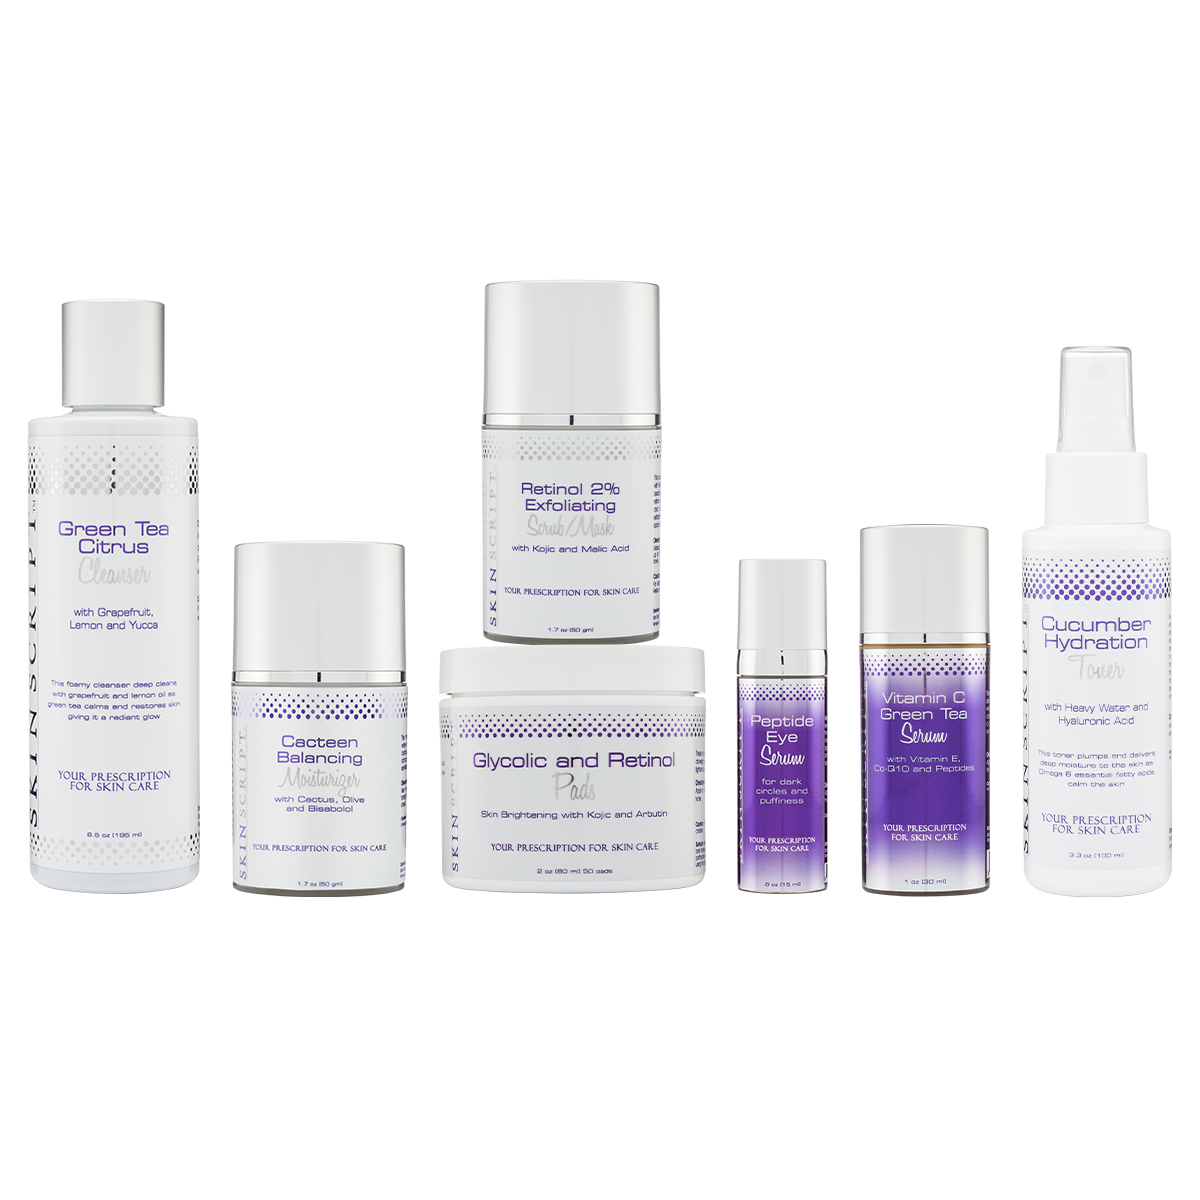 Normal/Combination Skin Care Kit